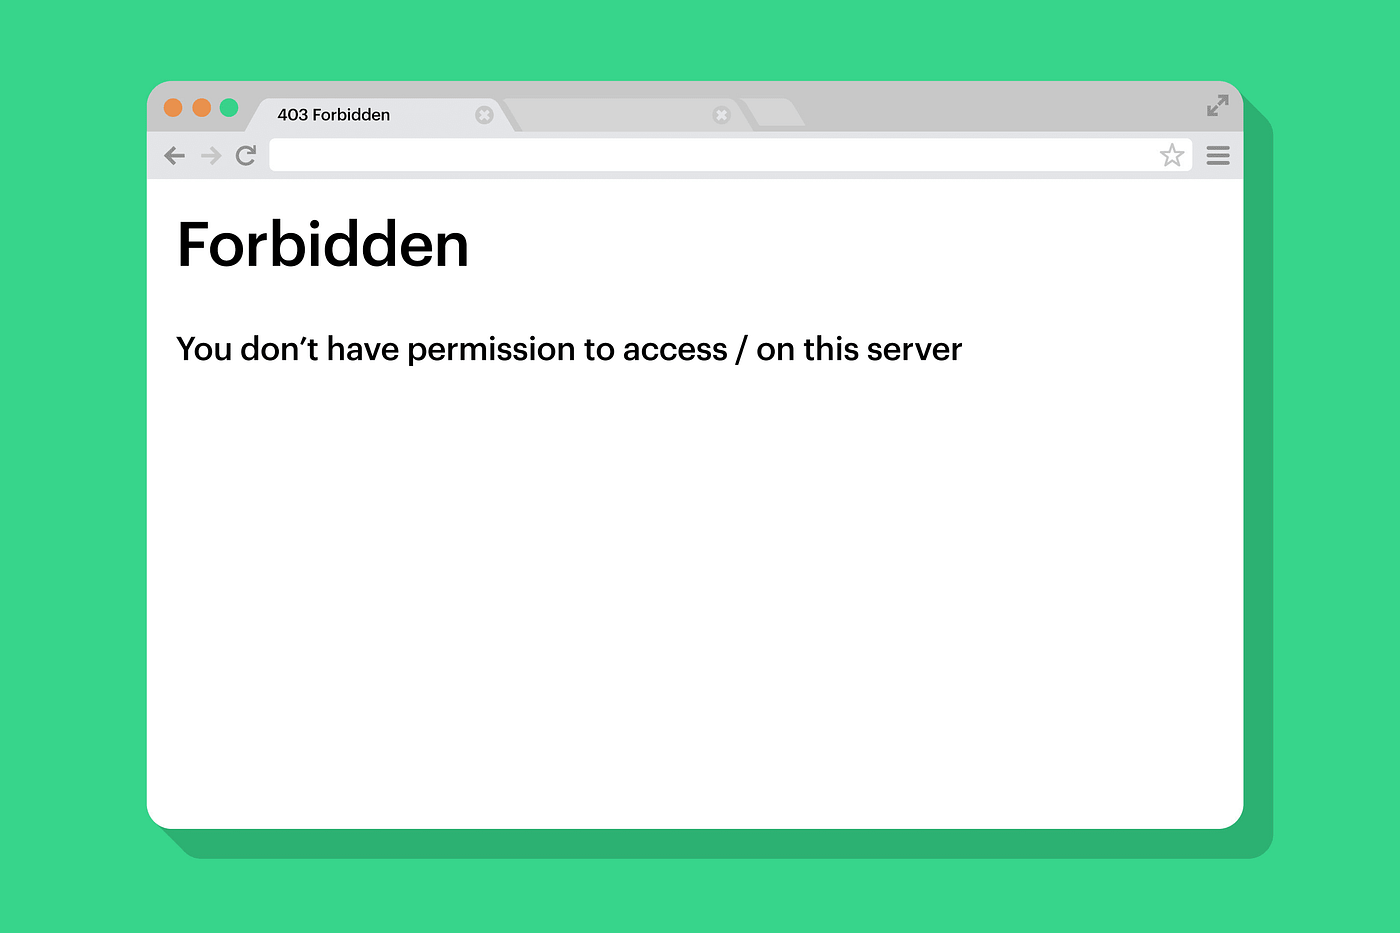 How to Resolve 403 Forbidden Errors on Your Website